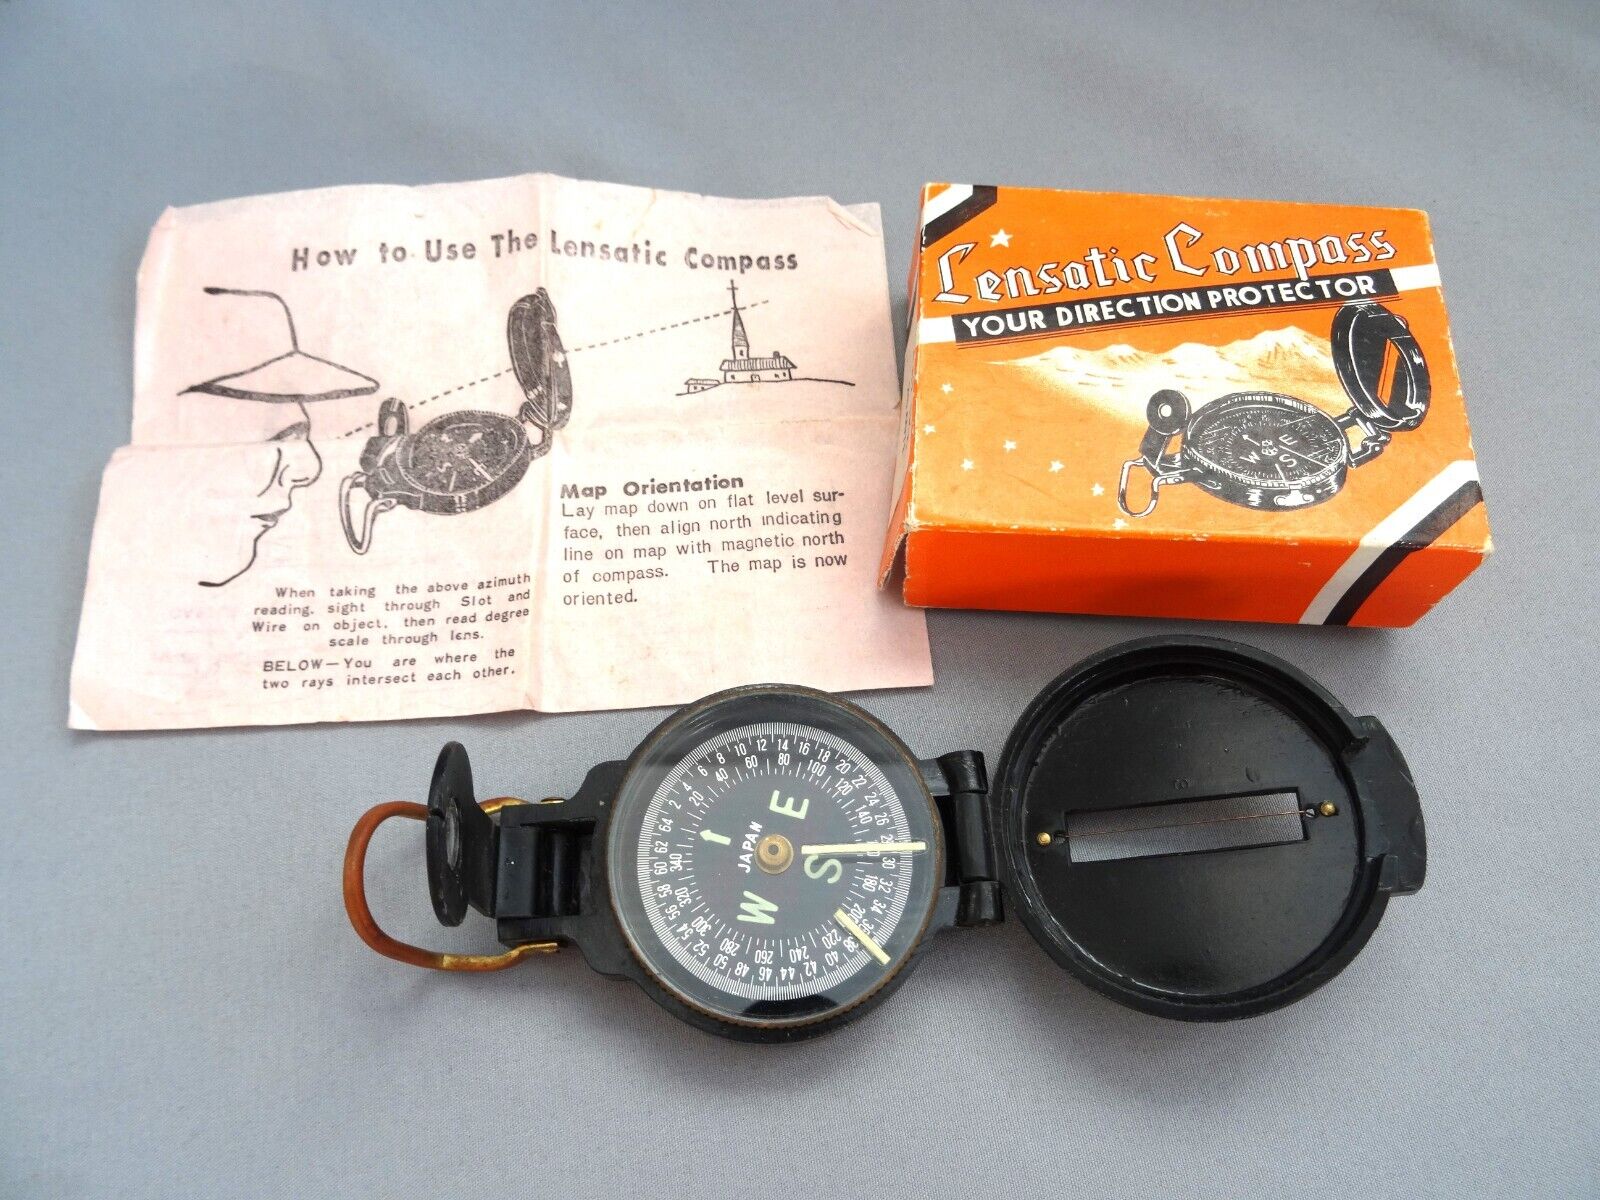 Vintage Lensmatic Engineer Directional Compass in Original Box circa 1960s 1970s